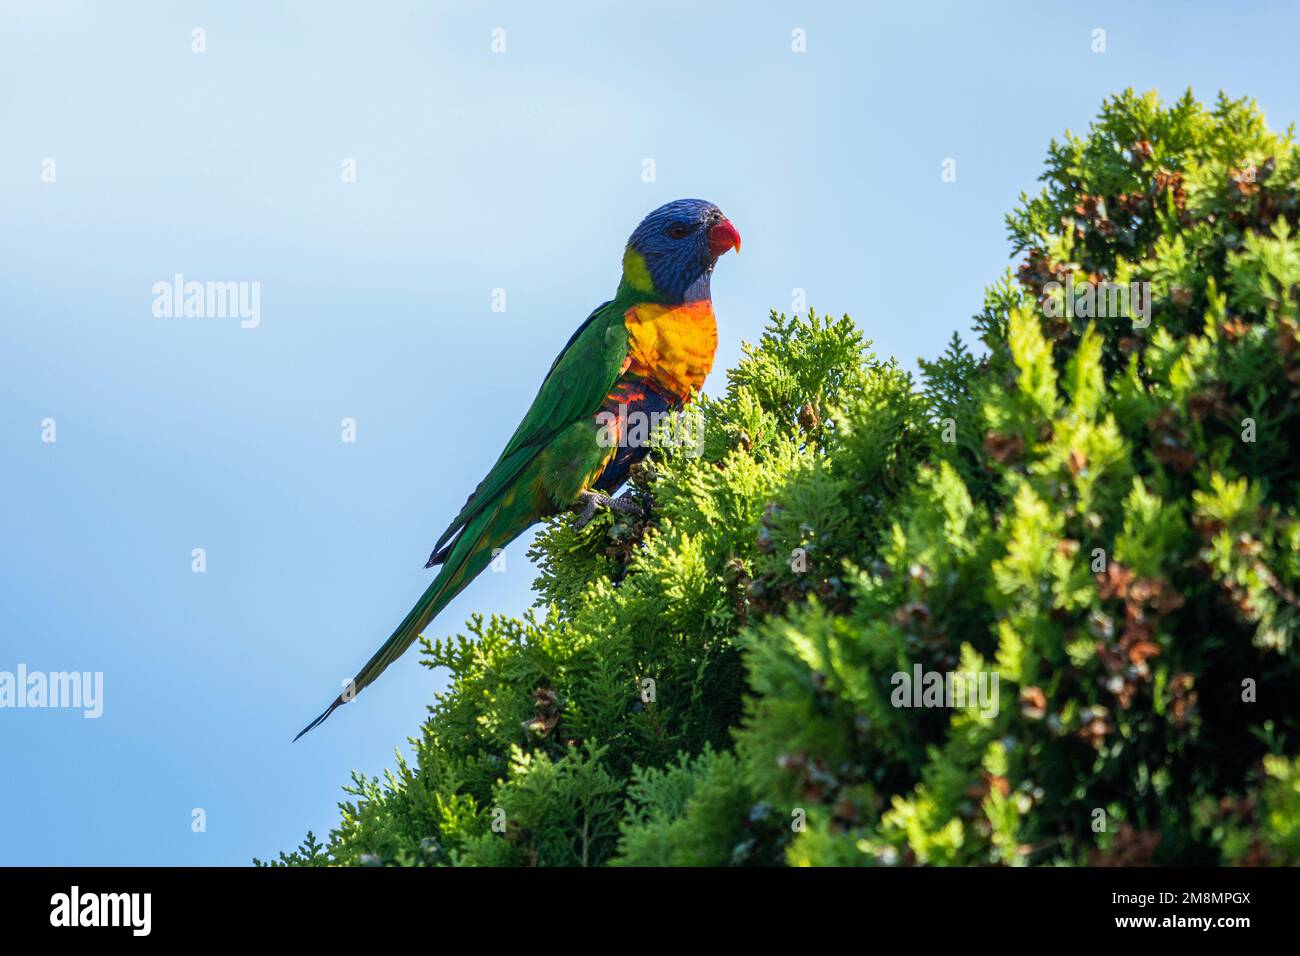 An Australian rainbow lorikeet (Trichoglossus moluccanus) perched on a tree in Adelaide Stock Photo